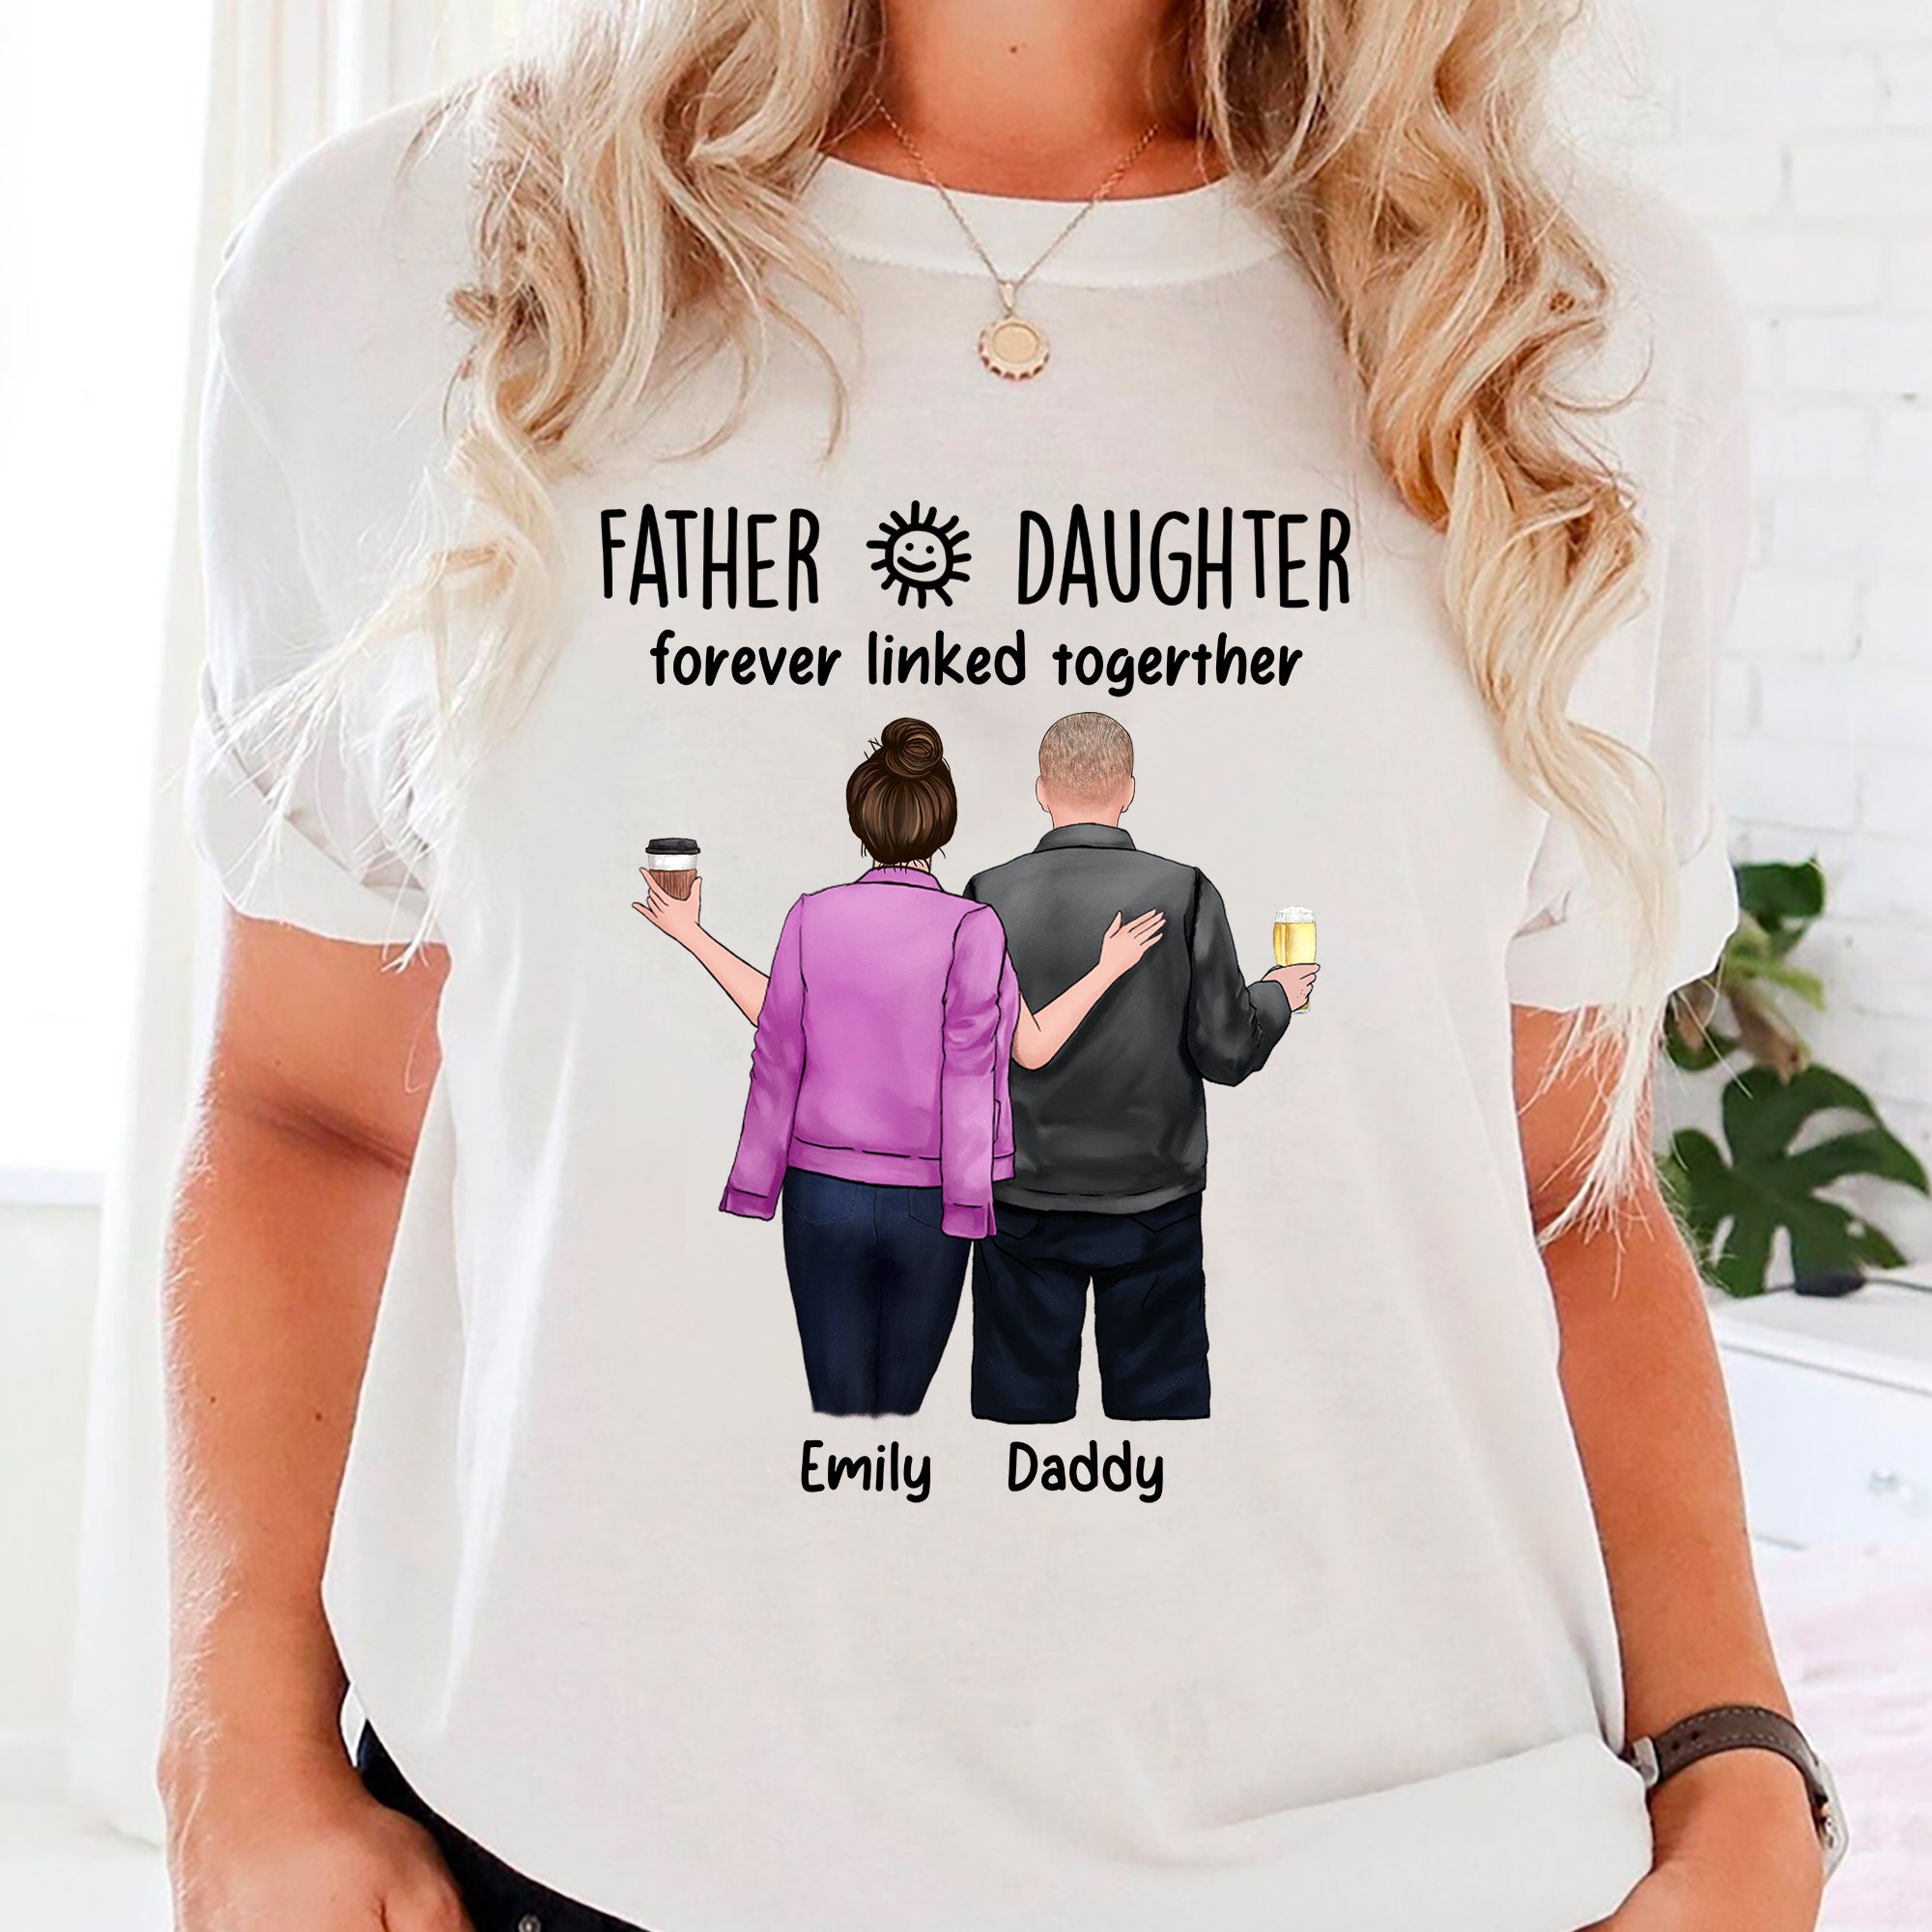 Daughter And Father Forever Linked Together - Custom Appearances And Names - Personalized T-Shirt - Family Gift